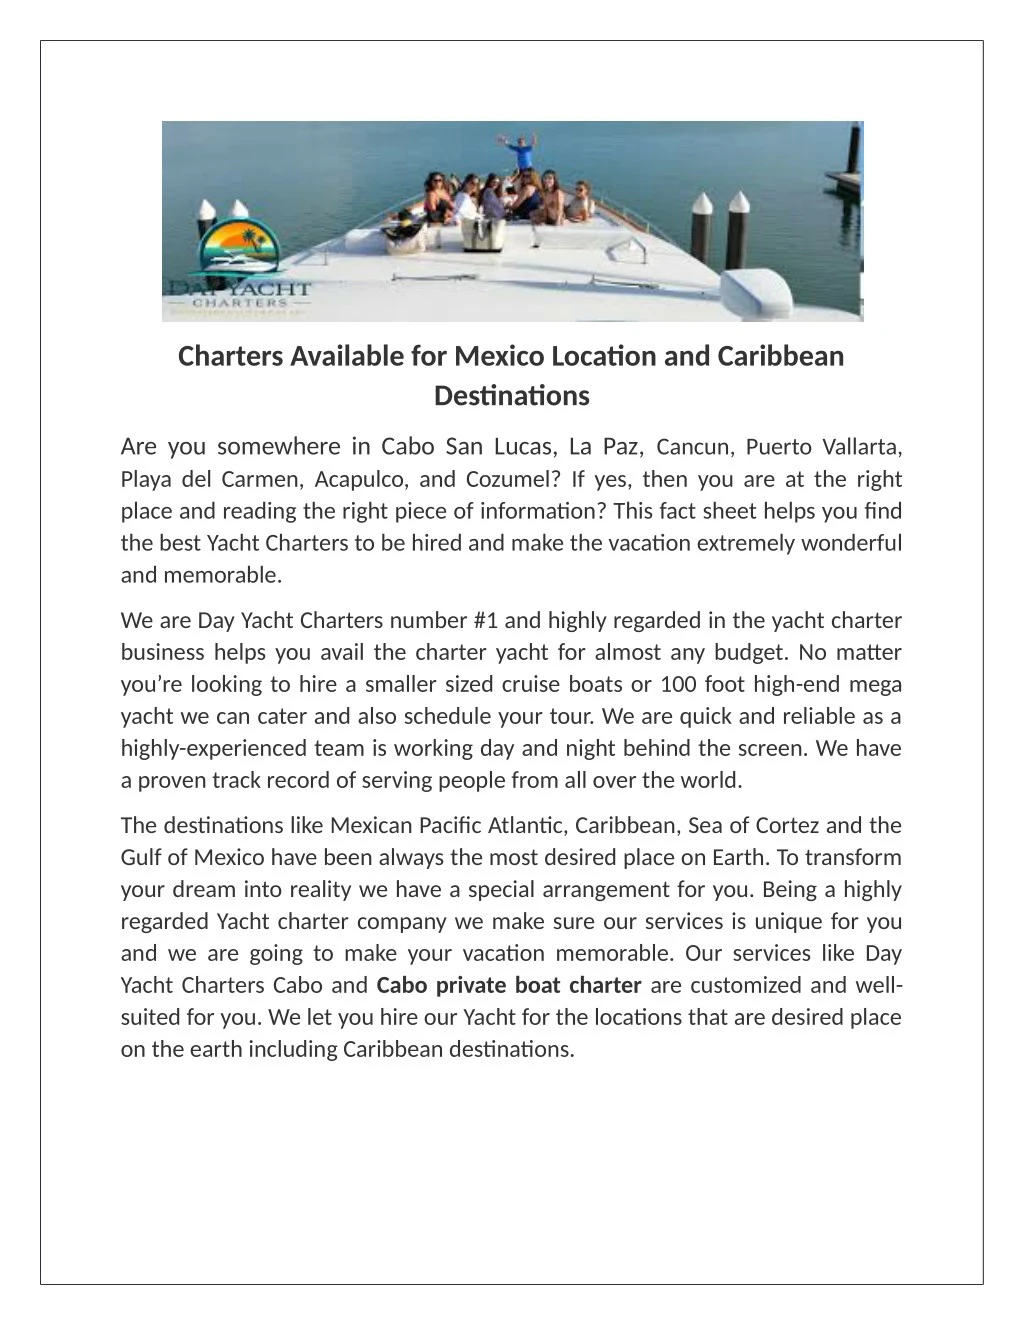 charters available for mexico location